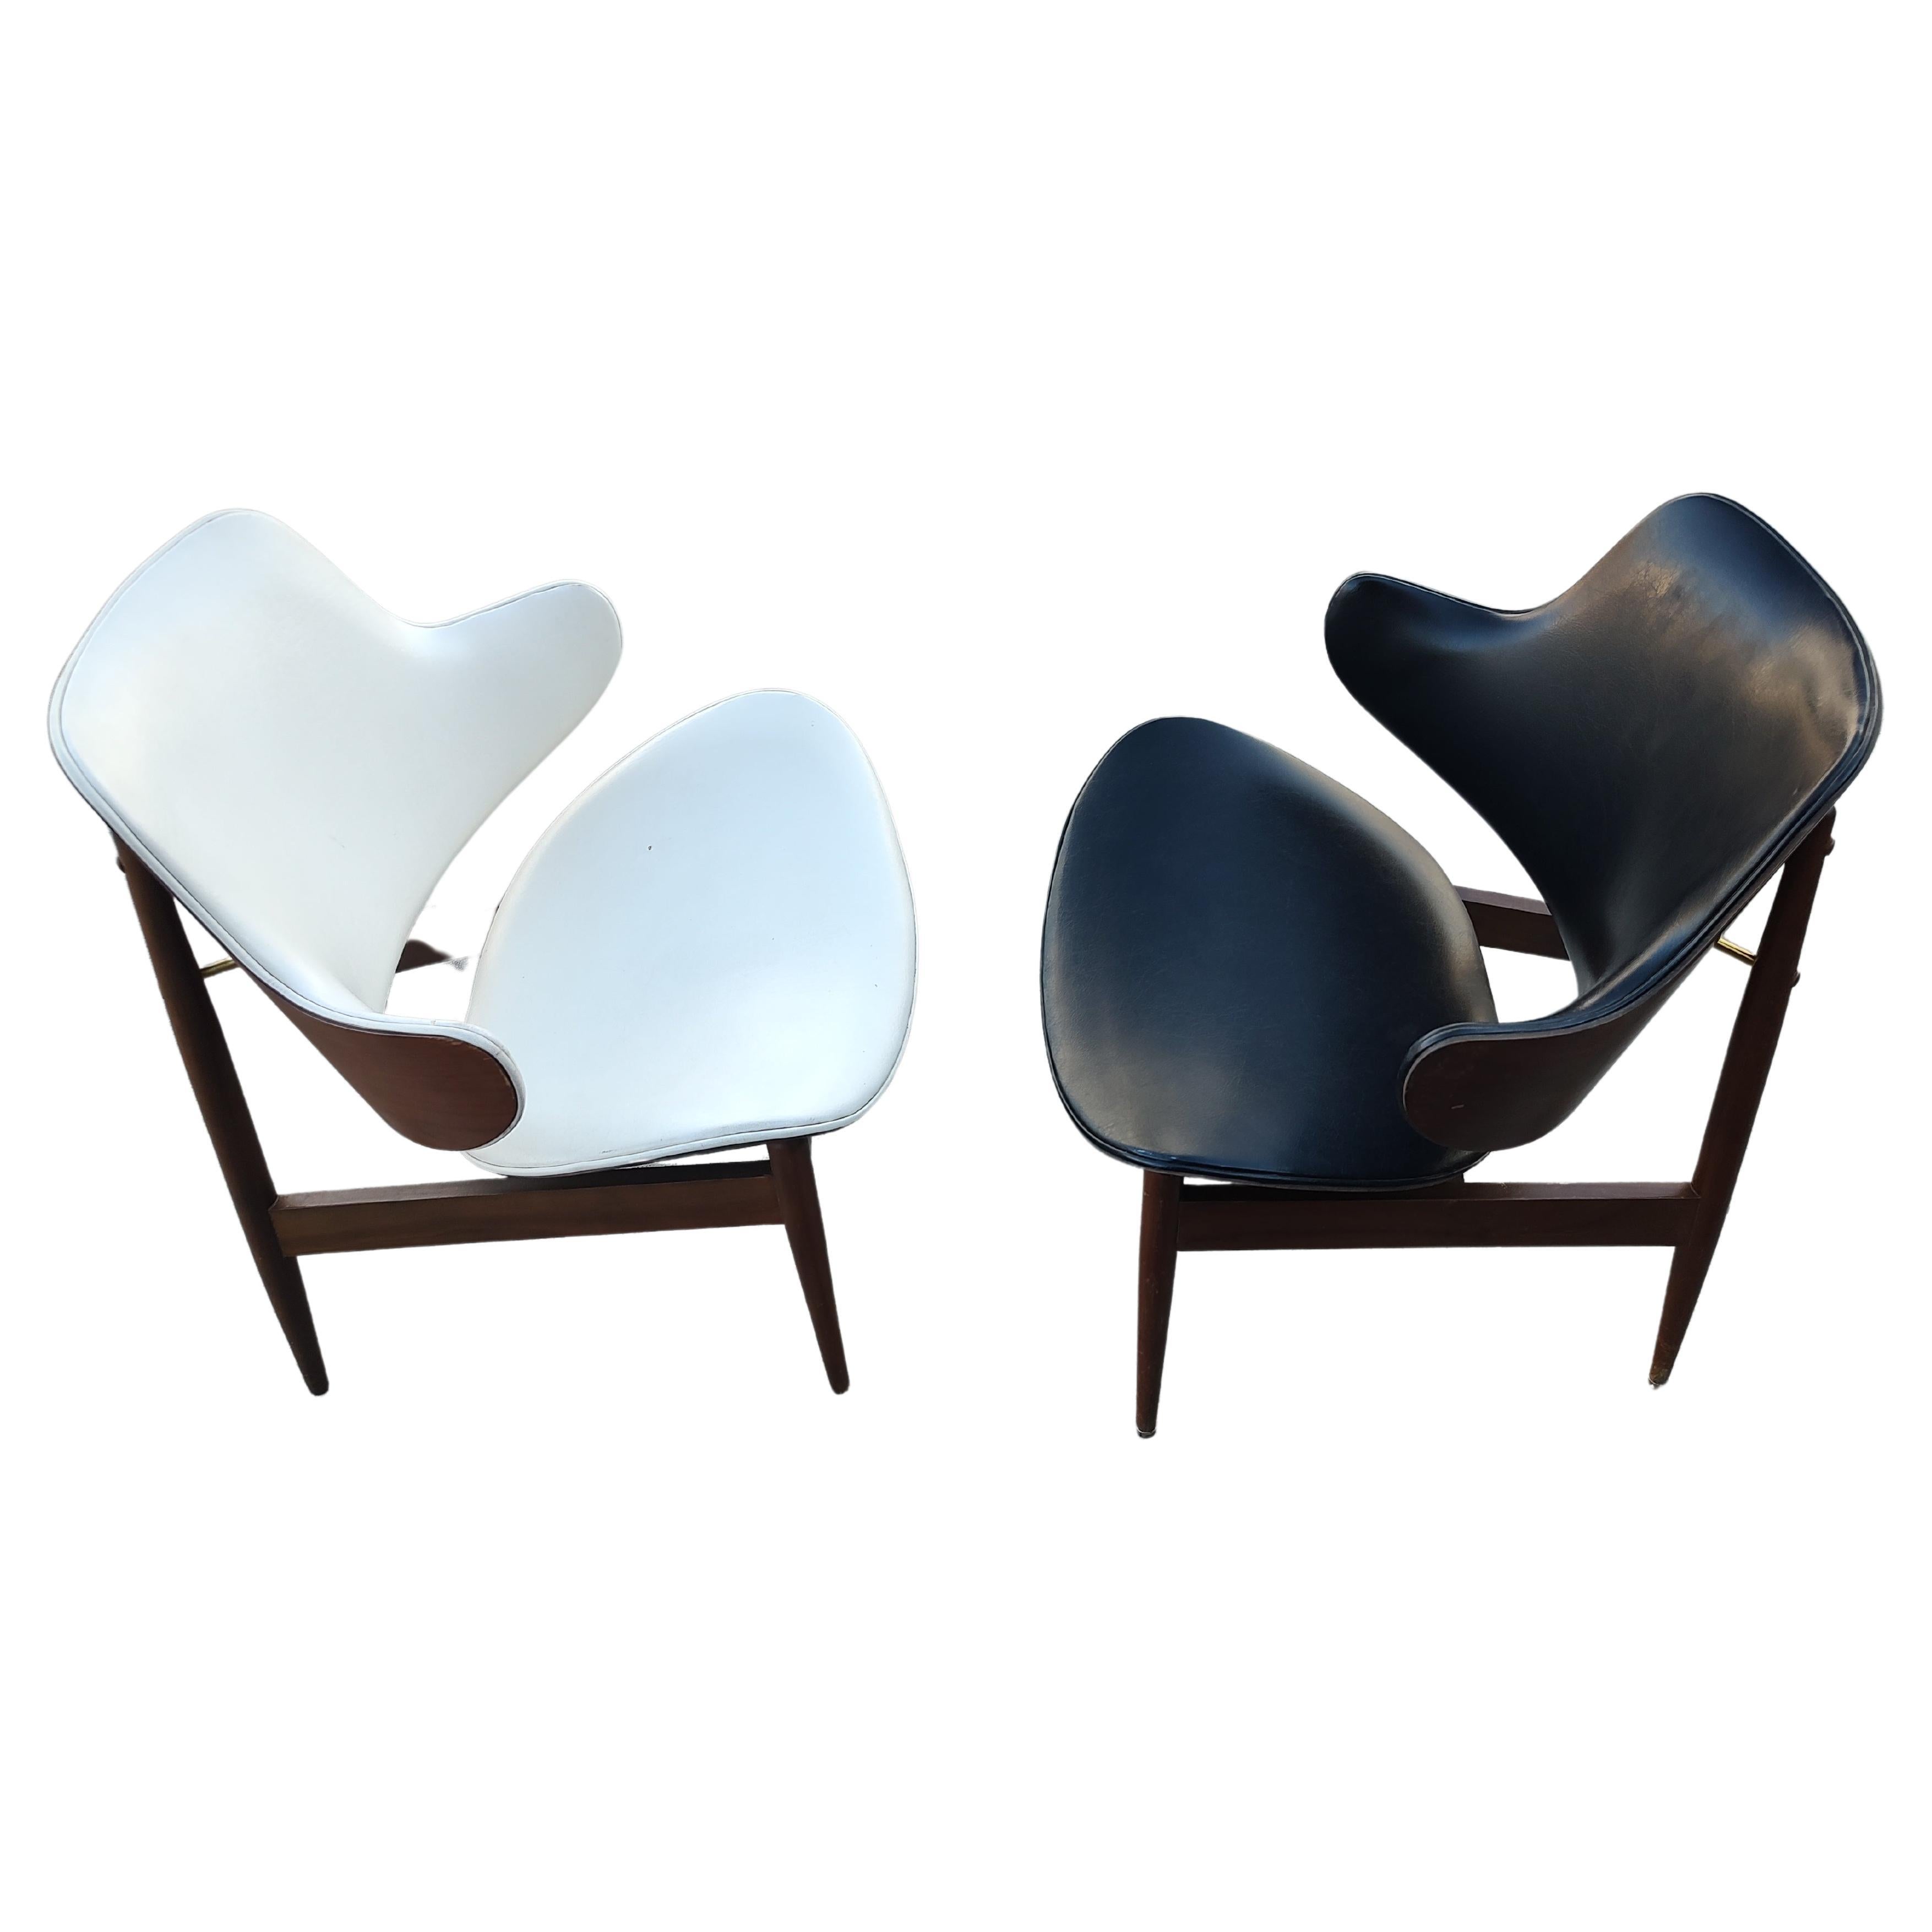 American Mid Century Modern Kodawood Clam Shell Chairs by Seymour James Wiener For Sale